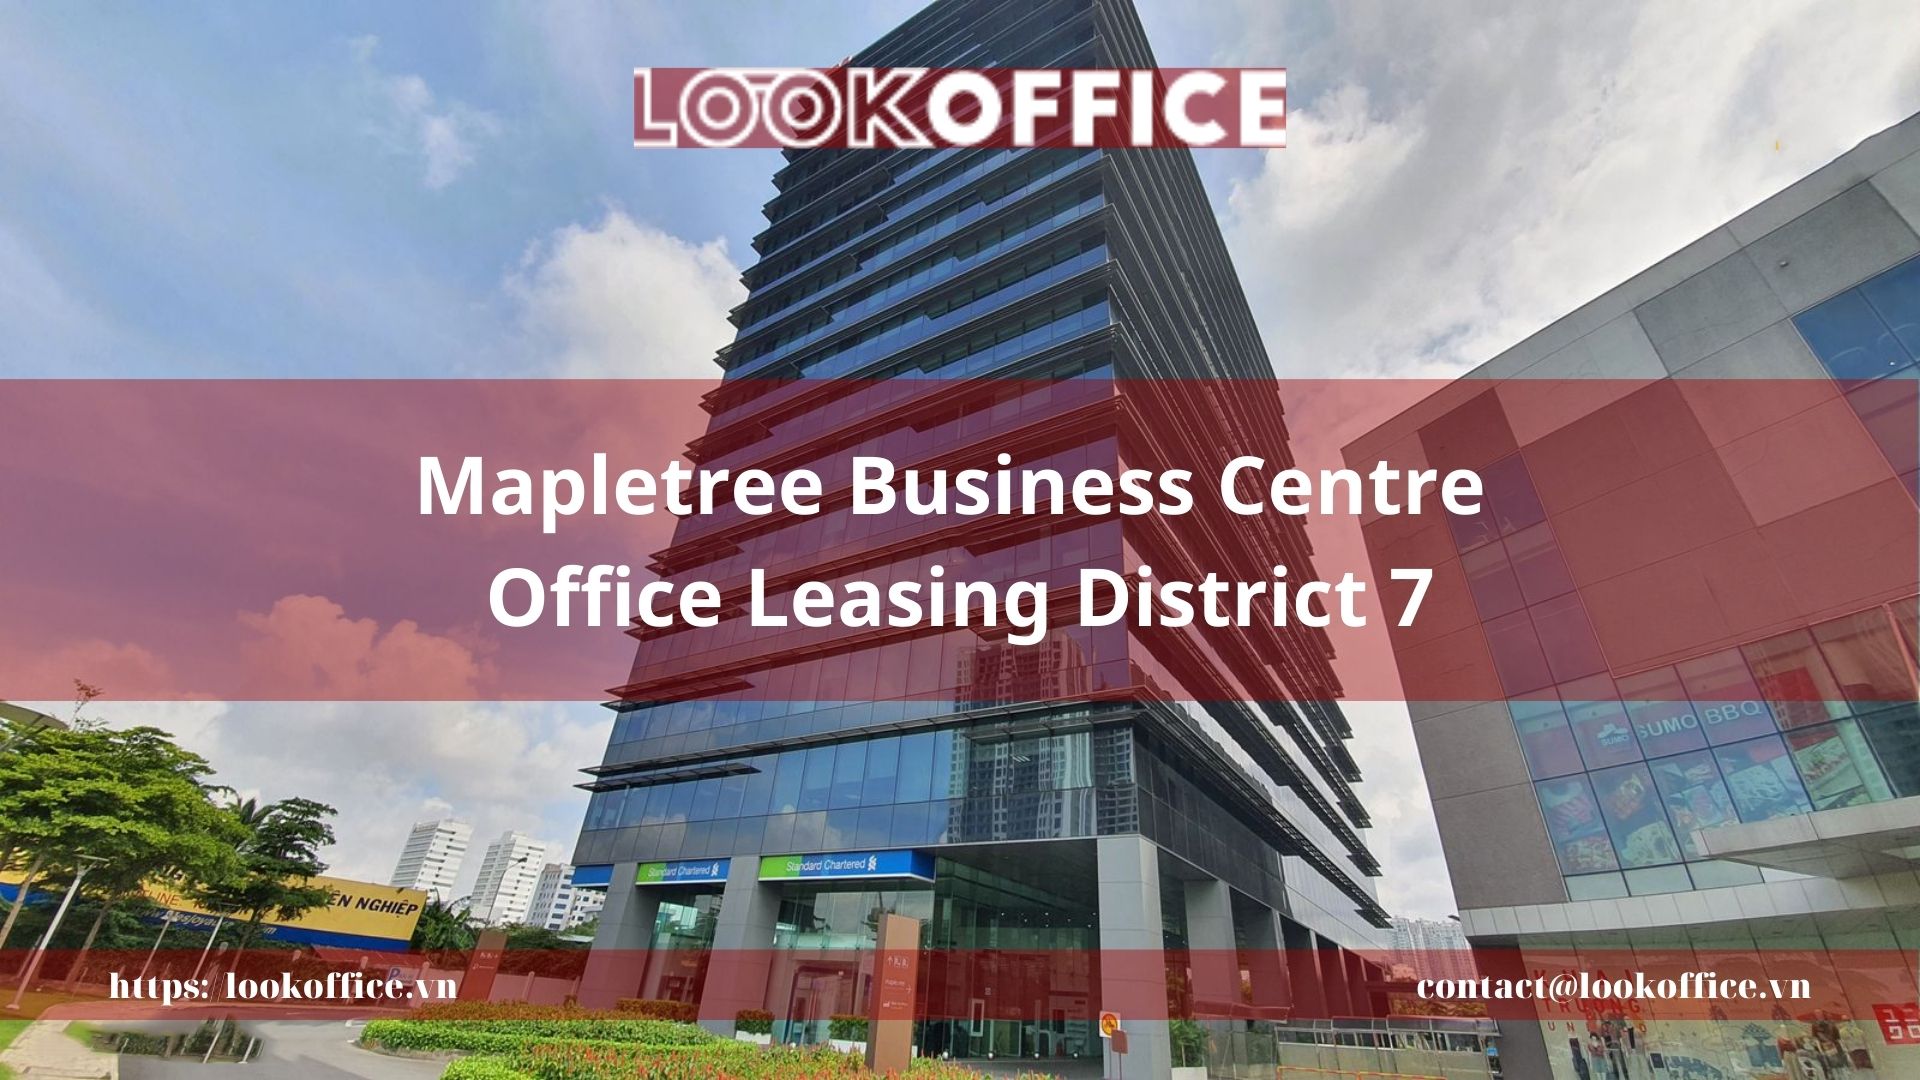 Mapletree Business Centre Office Leasing District 7